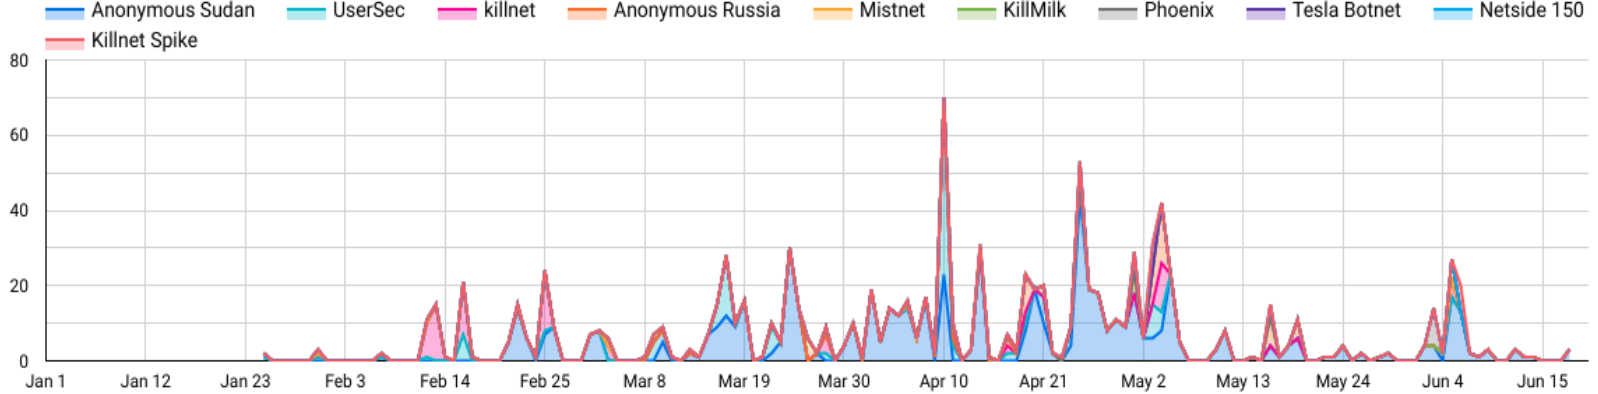 DDoS attacks by date and actor